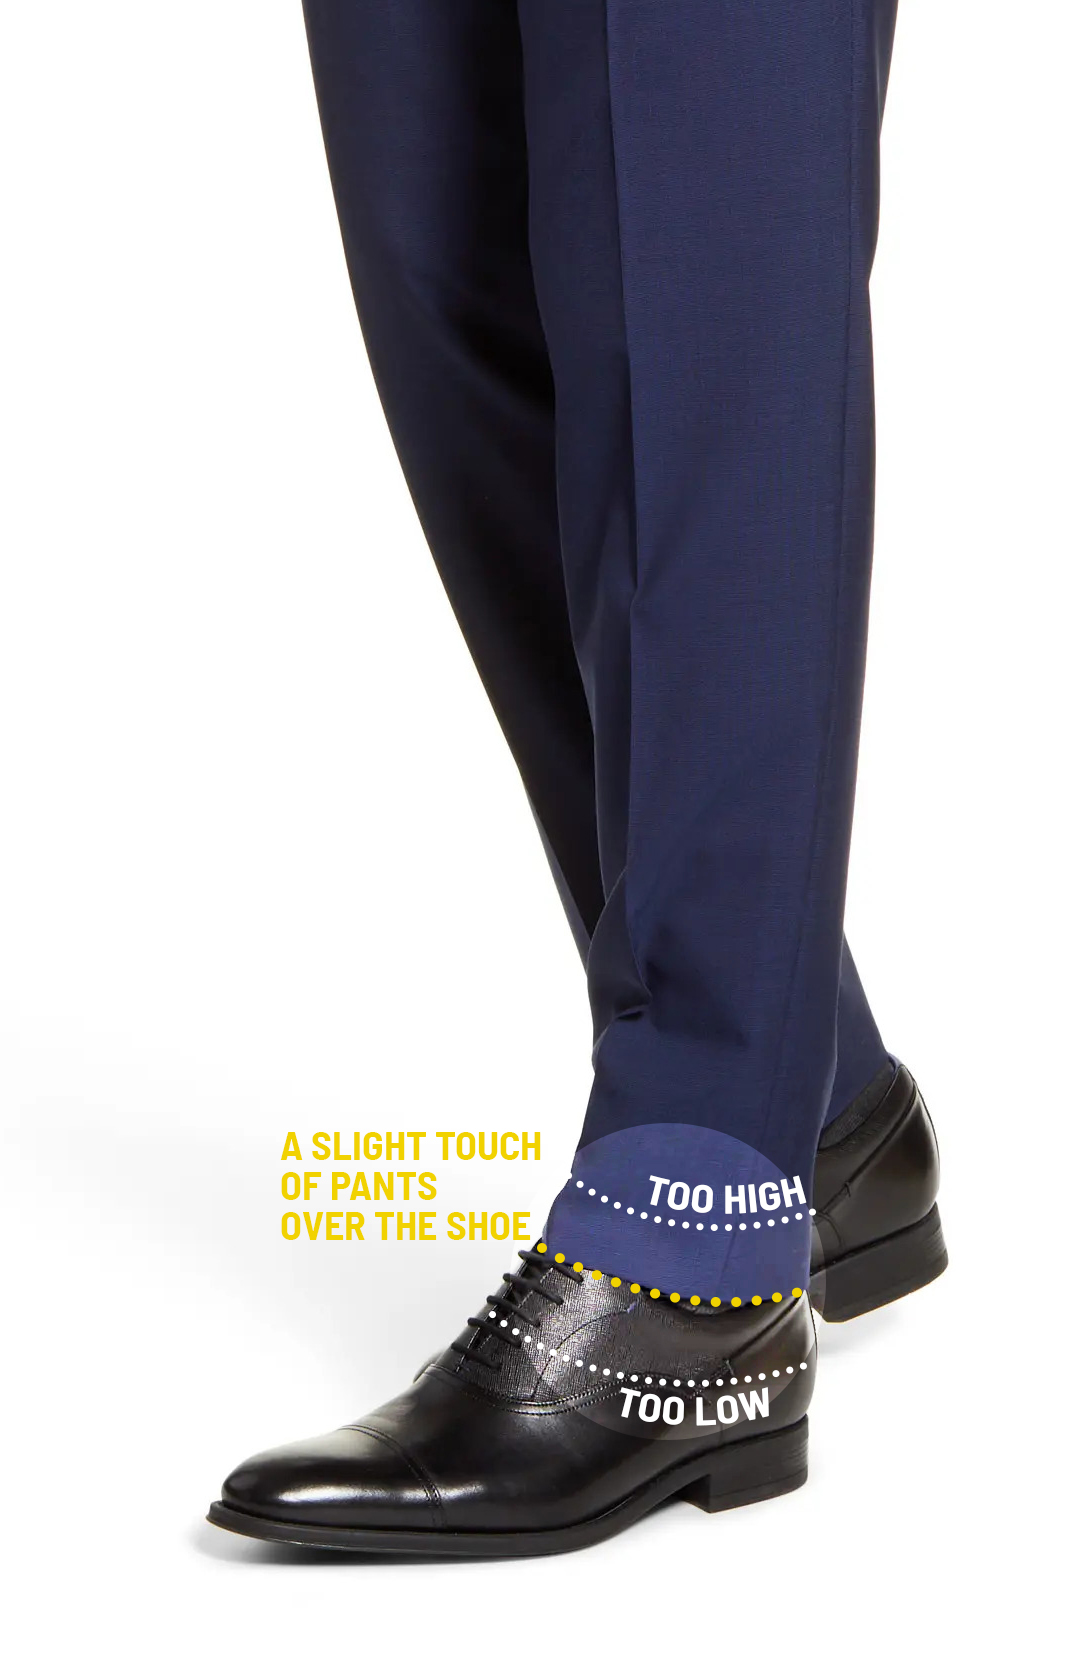 How should a suit fit: pants barely touch the shoe